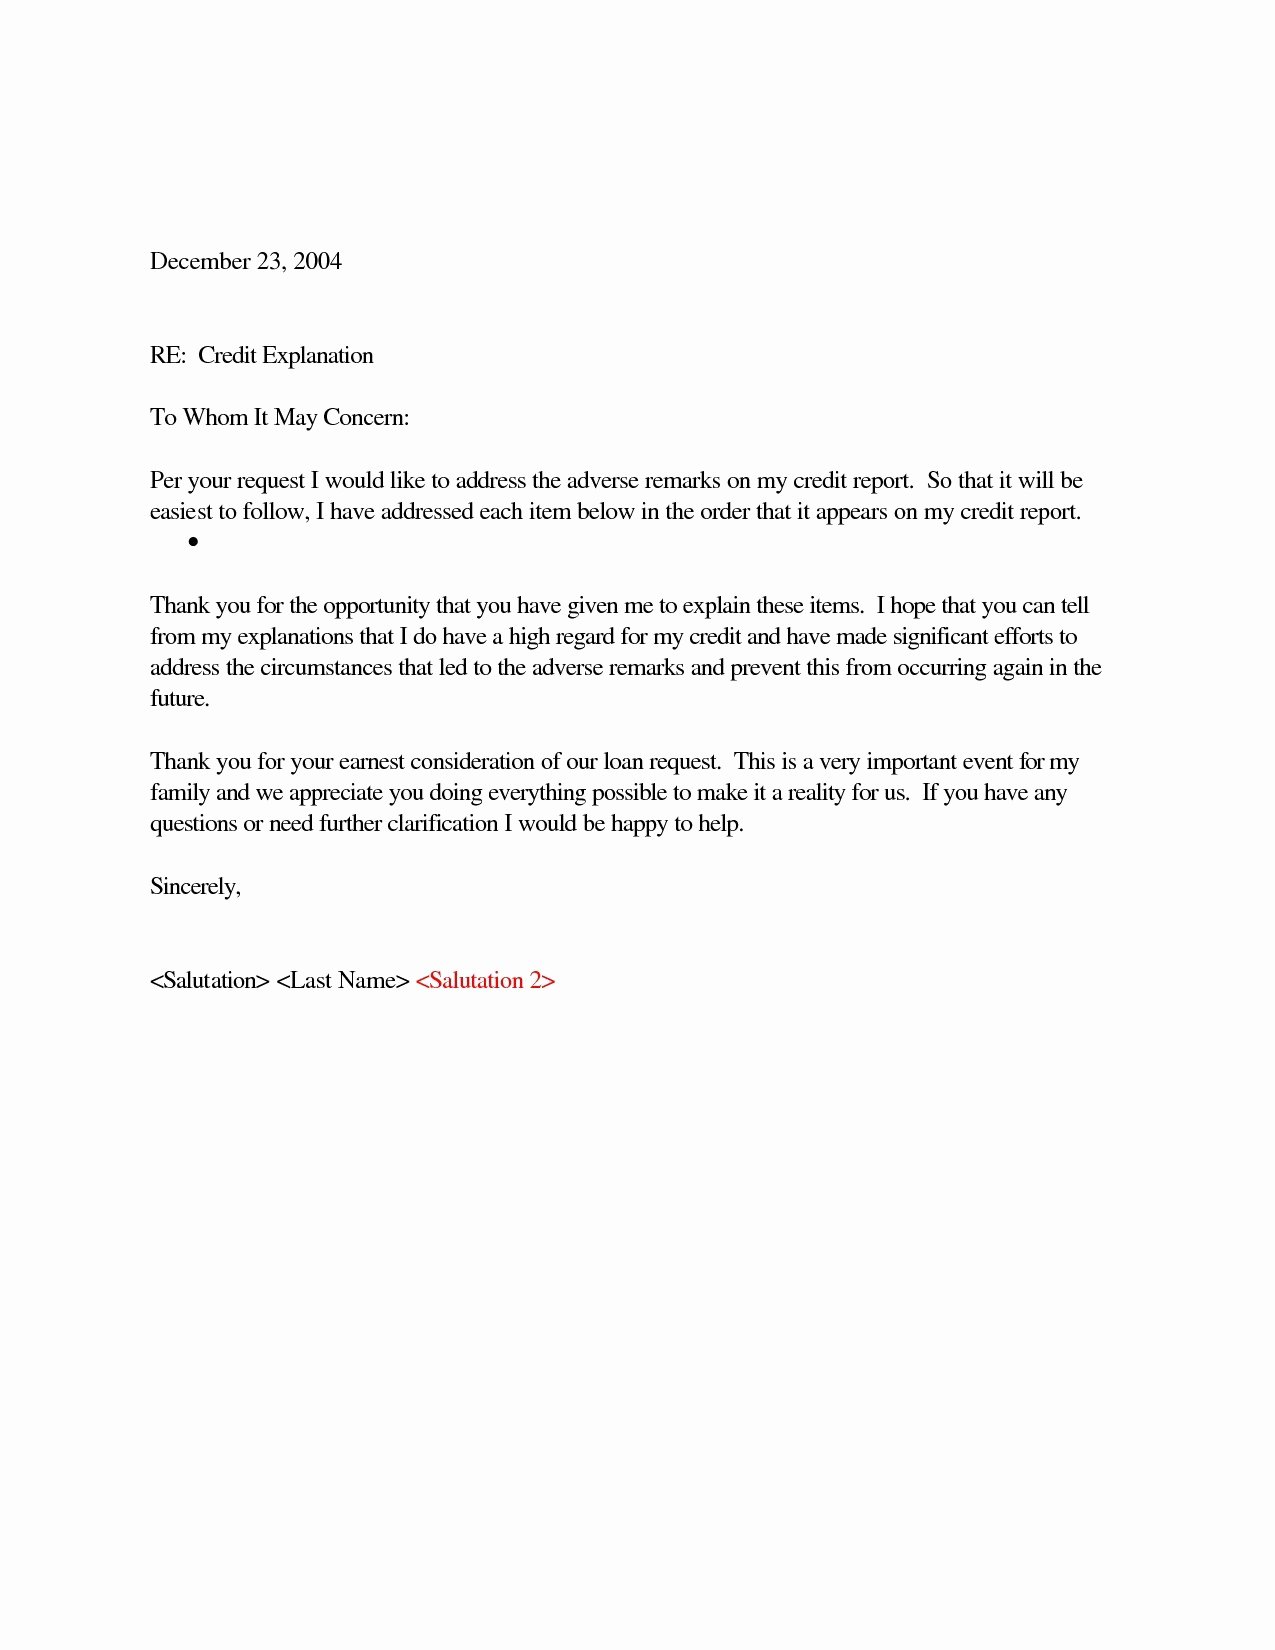 Cash Out Refinance Letter Template Lovely Letter Explanation Template Samples Valid Cash Out